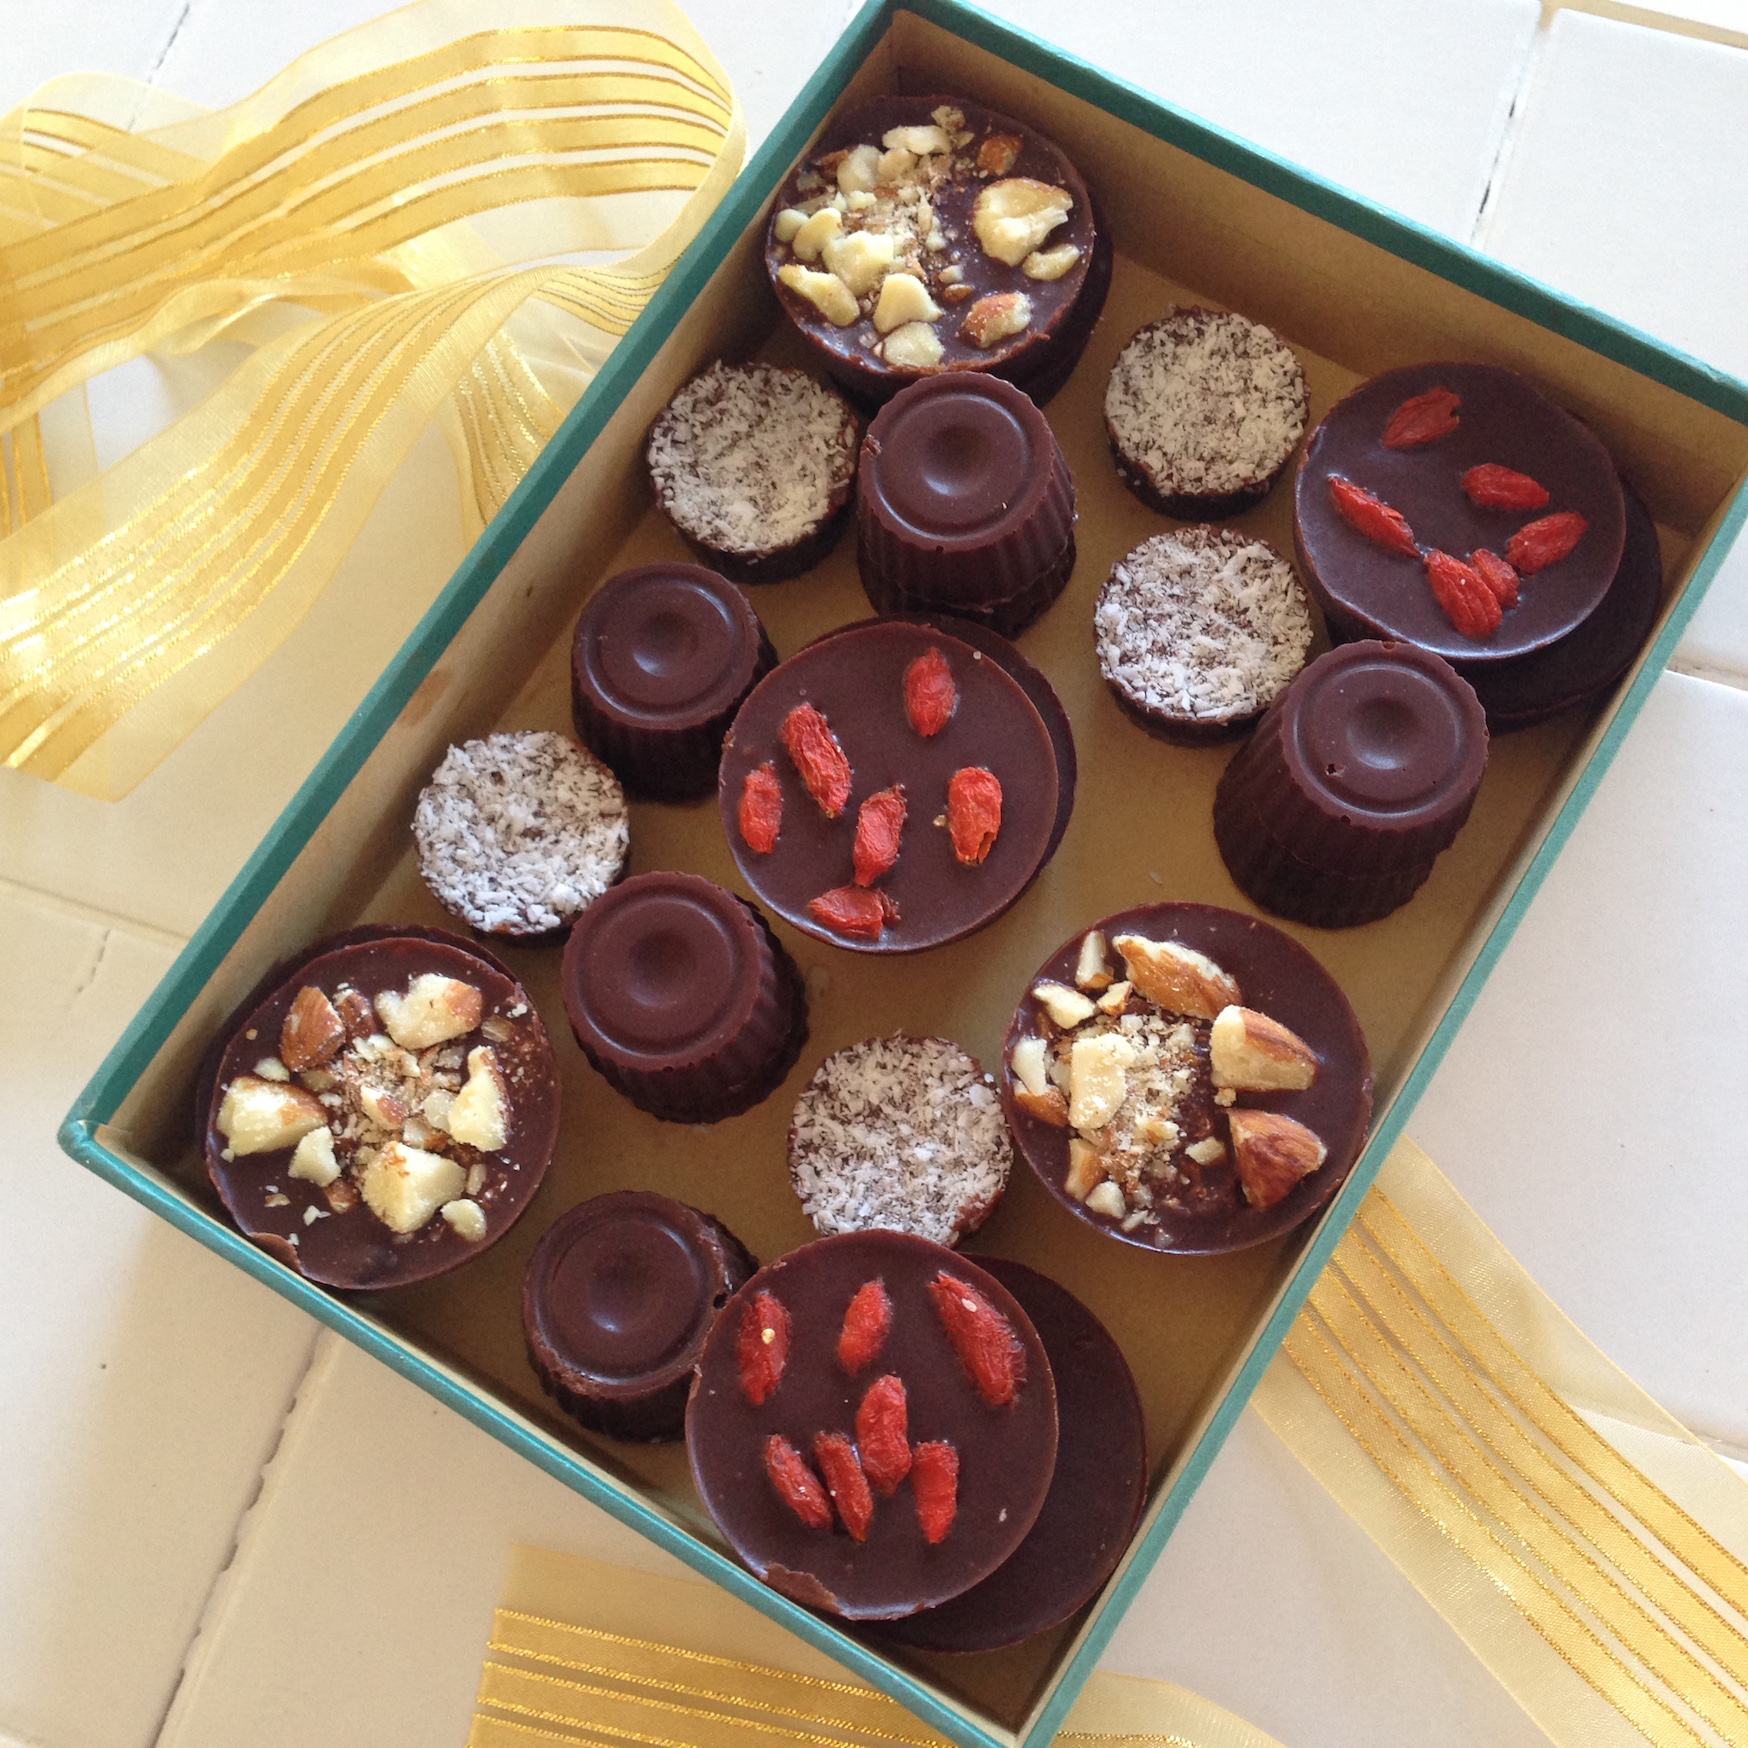 A box of home made, healthy chocolates